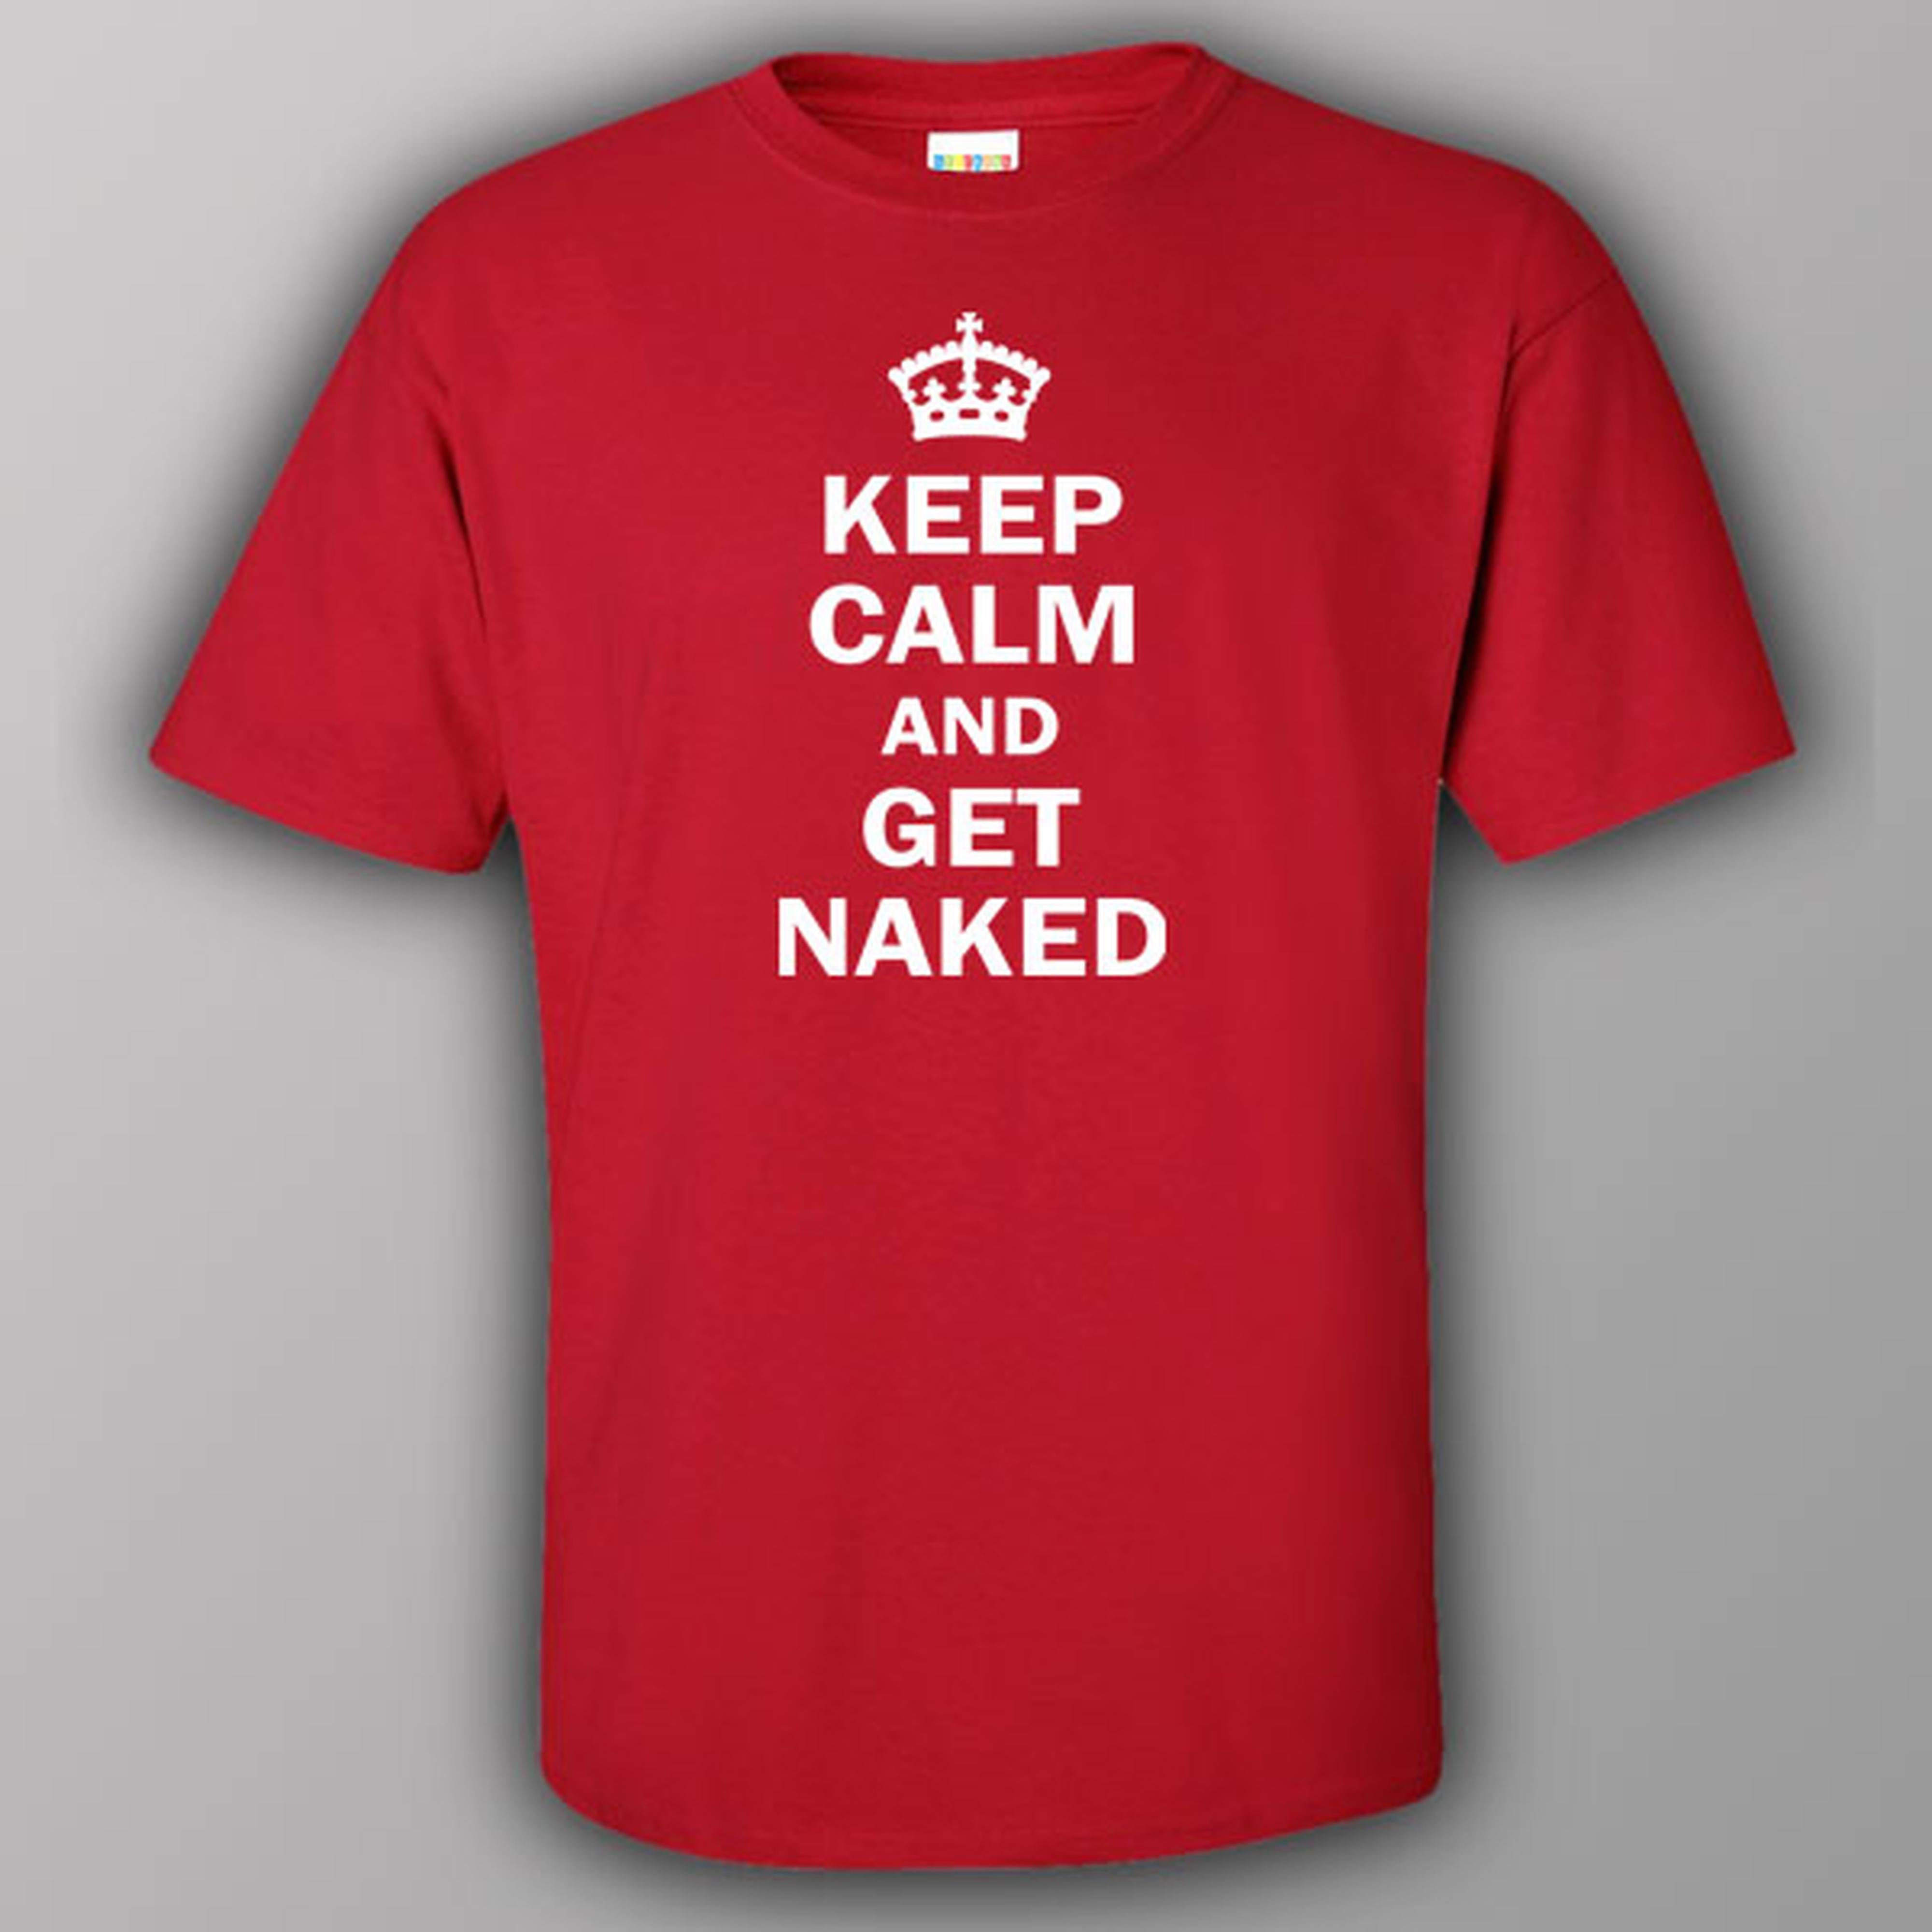 Keep calm and get naked - T-shirt